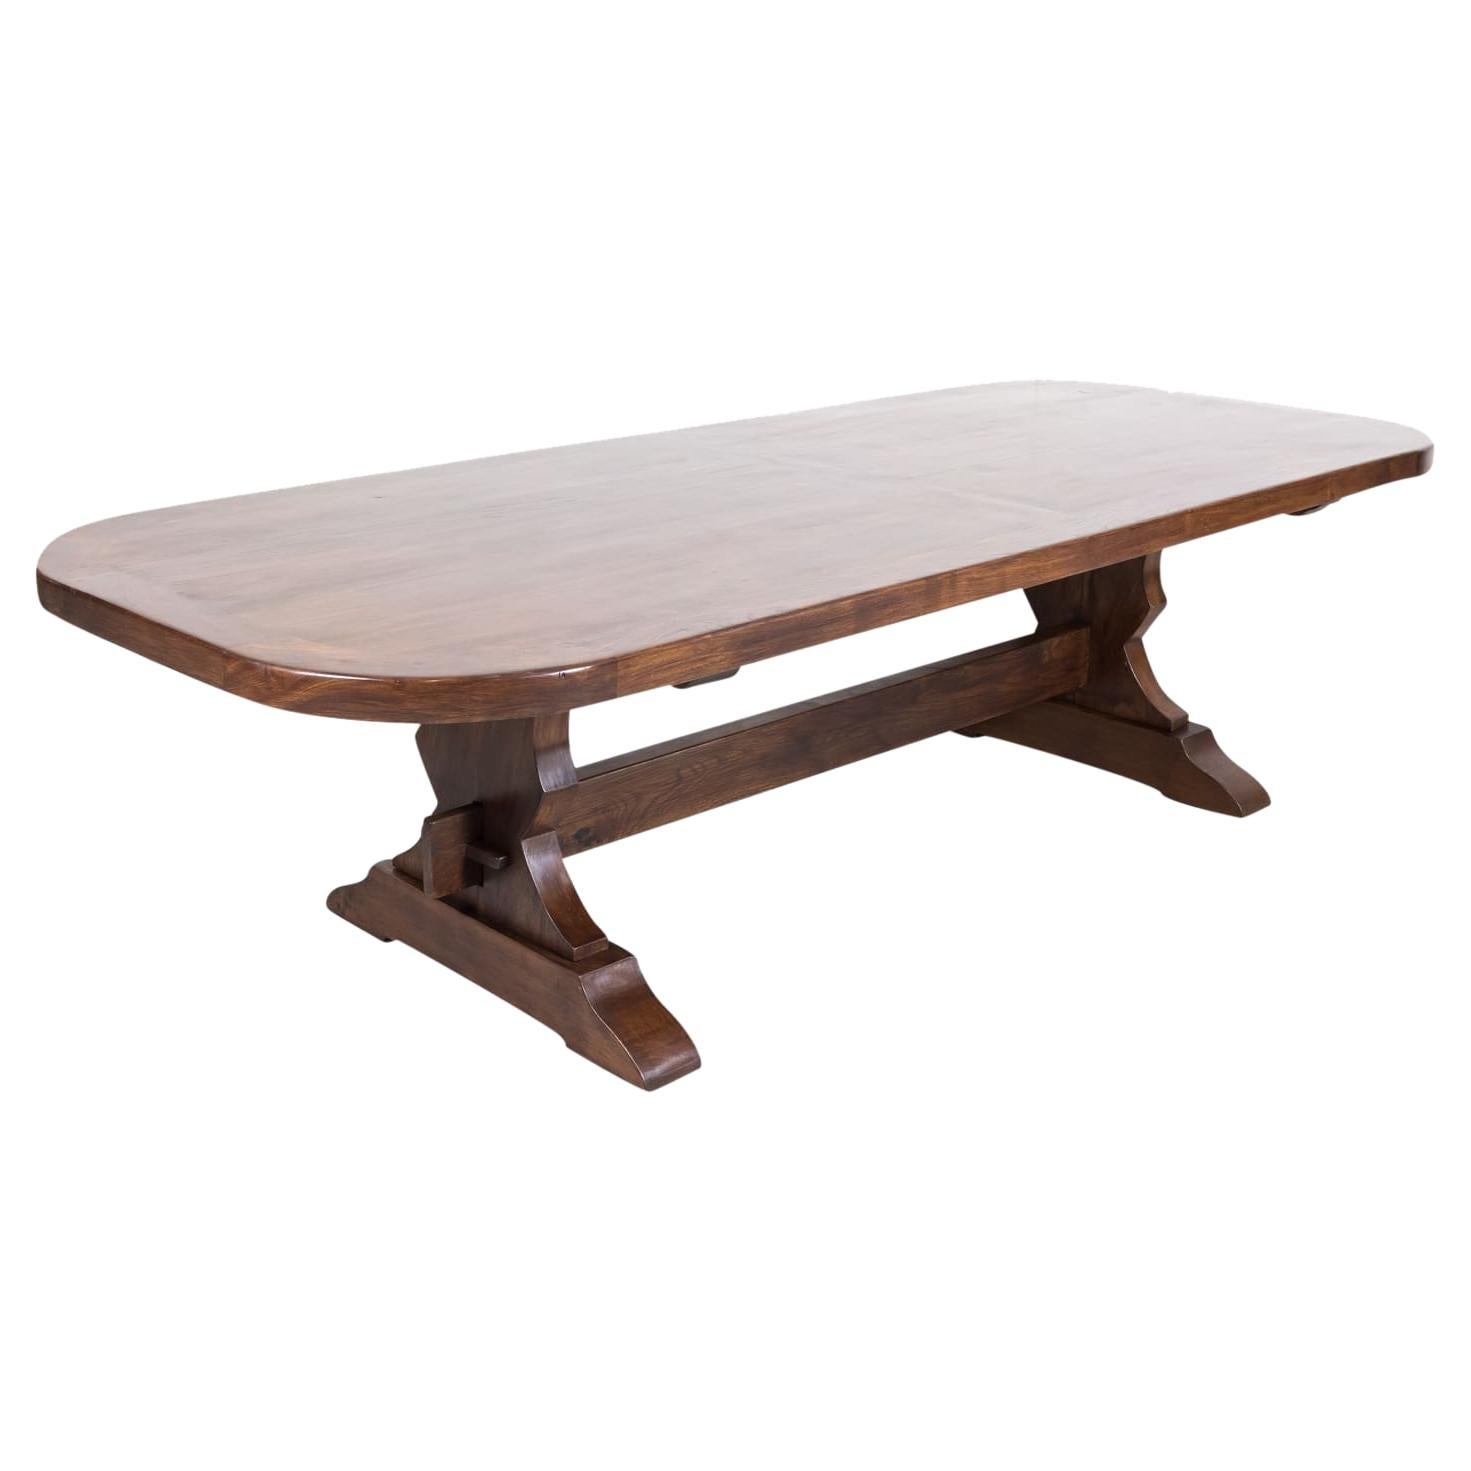 Large 19th Century Antique French Chestnut Trestle Table with Rounded Edges